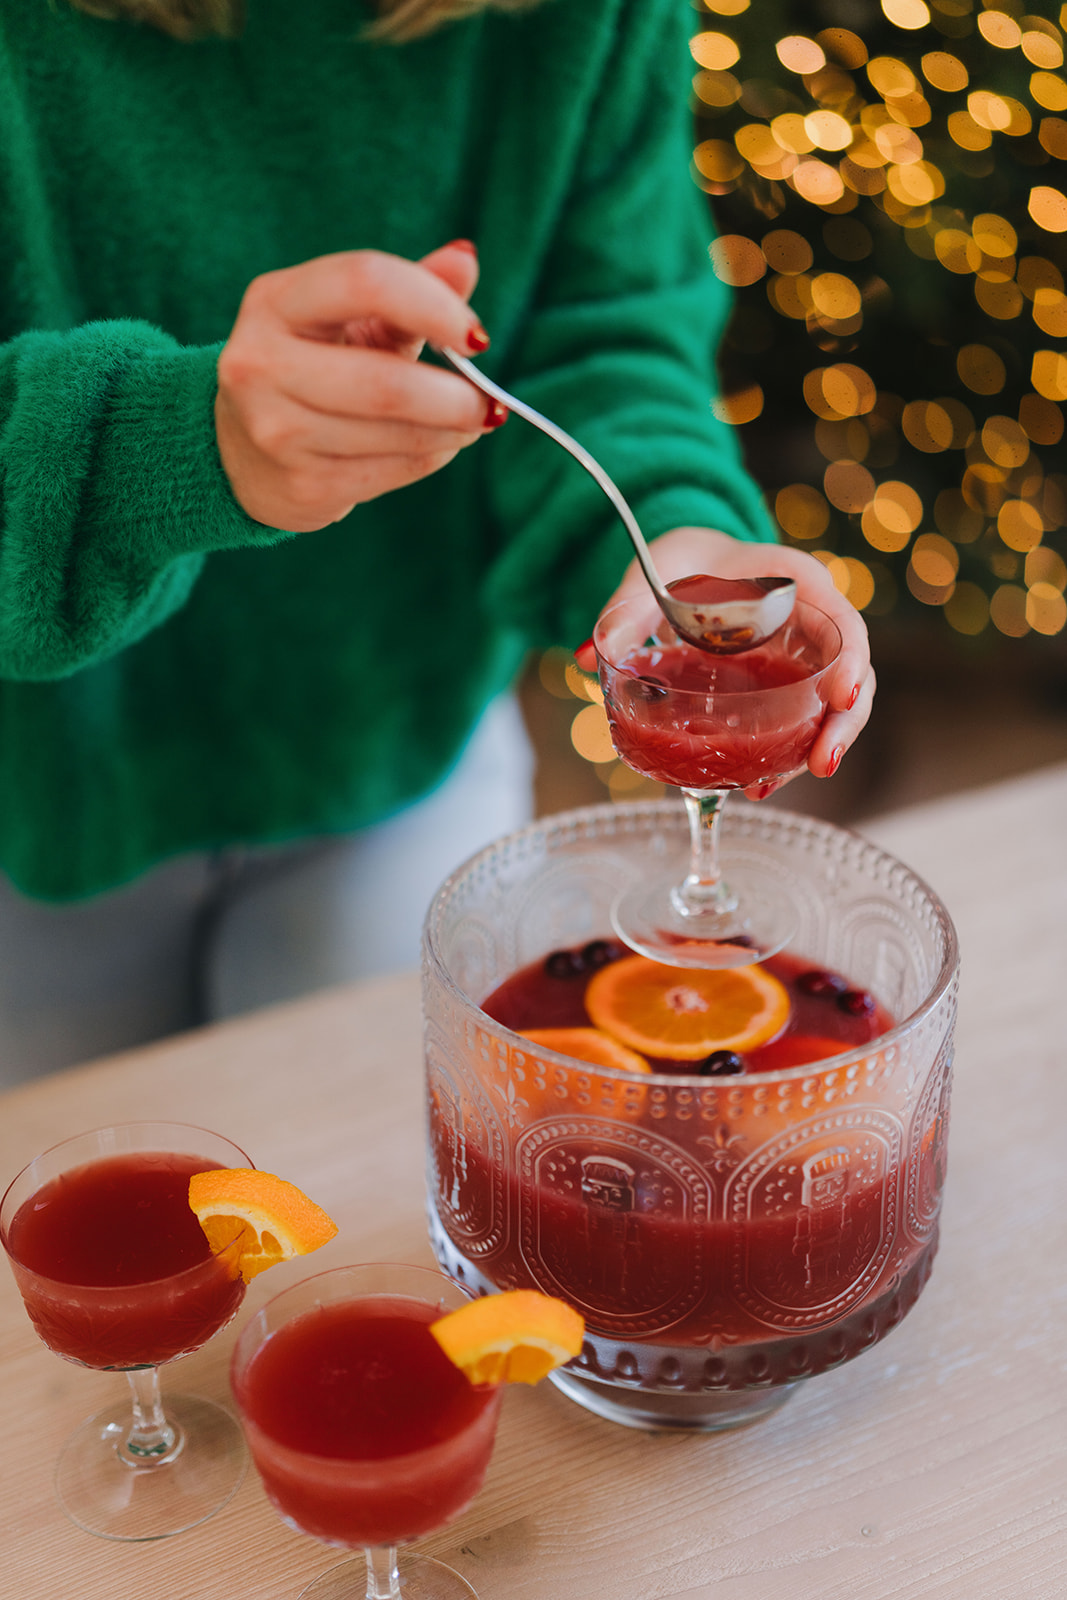 This Holiday Brunch Punch makes the perfect Christmas morning breakfast and brunch cocktail or mocktail. It's perfect for kids and adults and is a festive holiday punch recipe | On the blog at kirstenturk.com